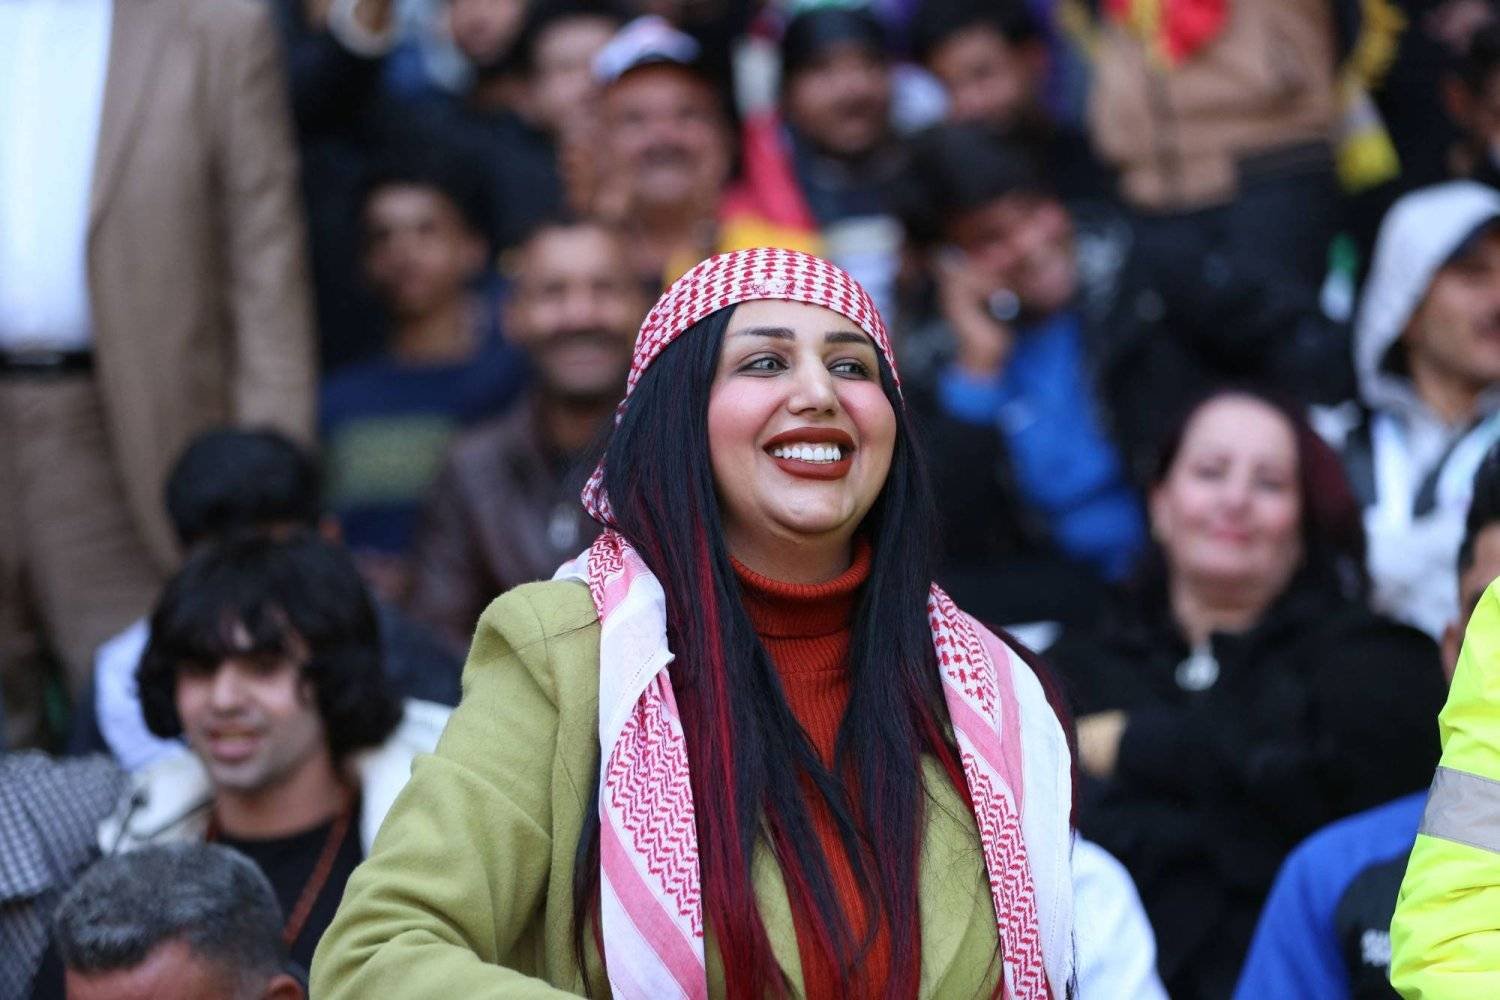 Iraqi TikTok celebrity Um Fahad is pictured at the Basra International Stadium during a match of the Arabian Gulf Cup football tournament on January 19, 2023. (Photo by Hussein FALEH / AFP)